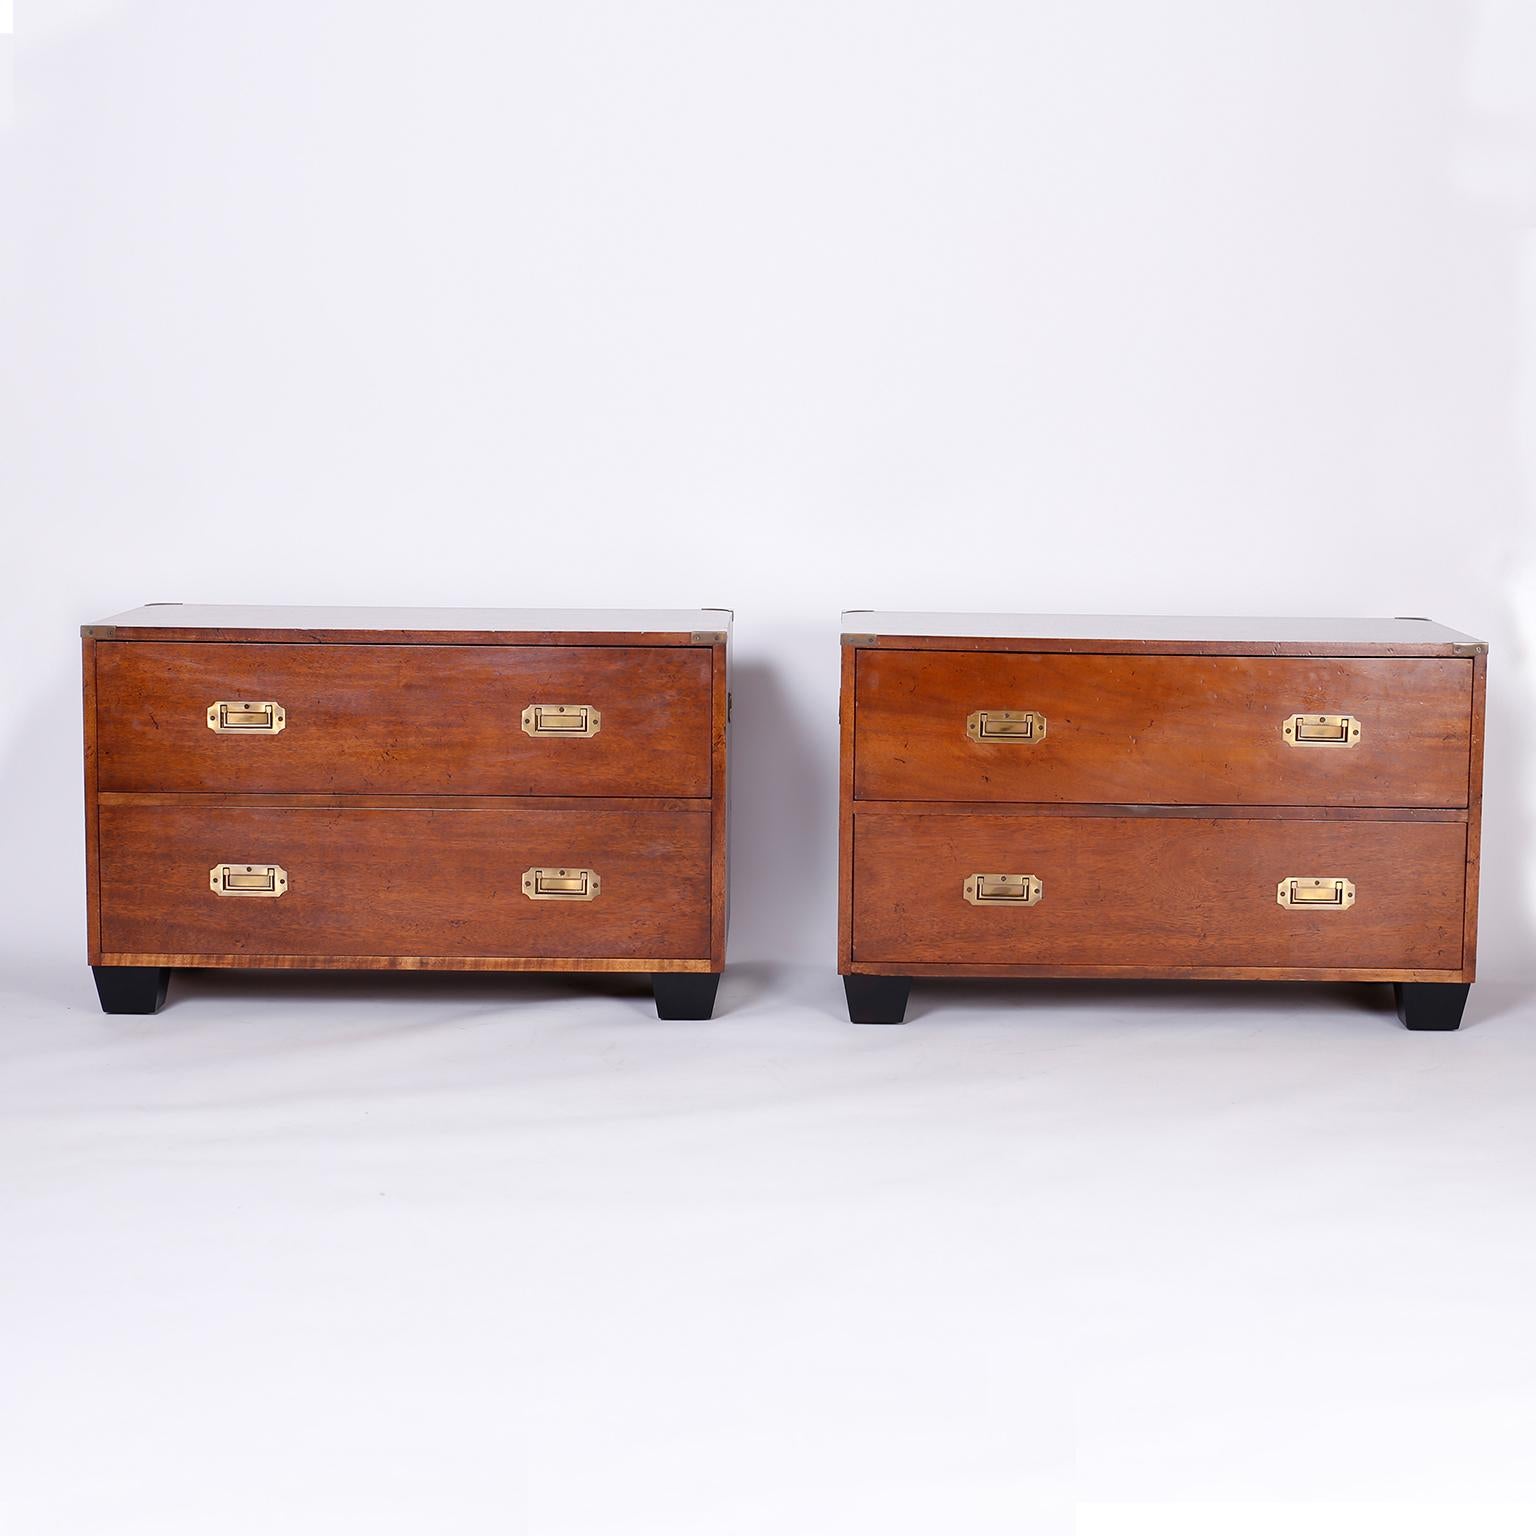 Pair of campaign style two drawer stands crafted in mahogany with brass hardware and ebonized tapered block feet. Perfect marriage of an antique concept with a modern form. Possibly by Charlotte Horstmann of Hong Kong.